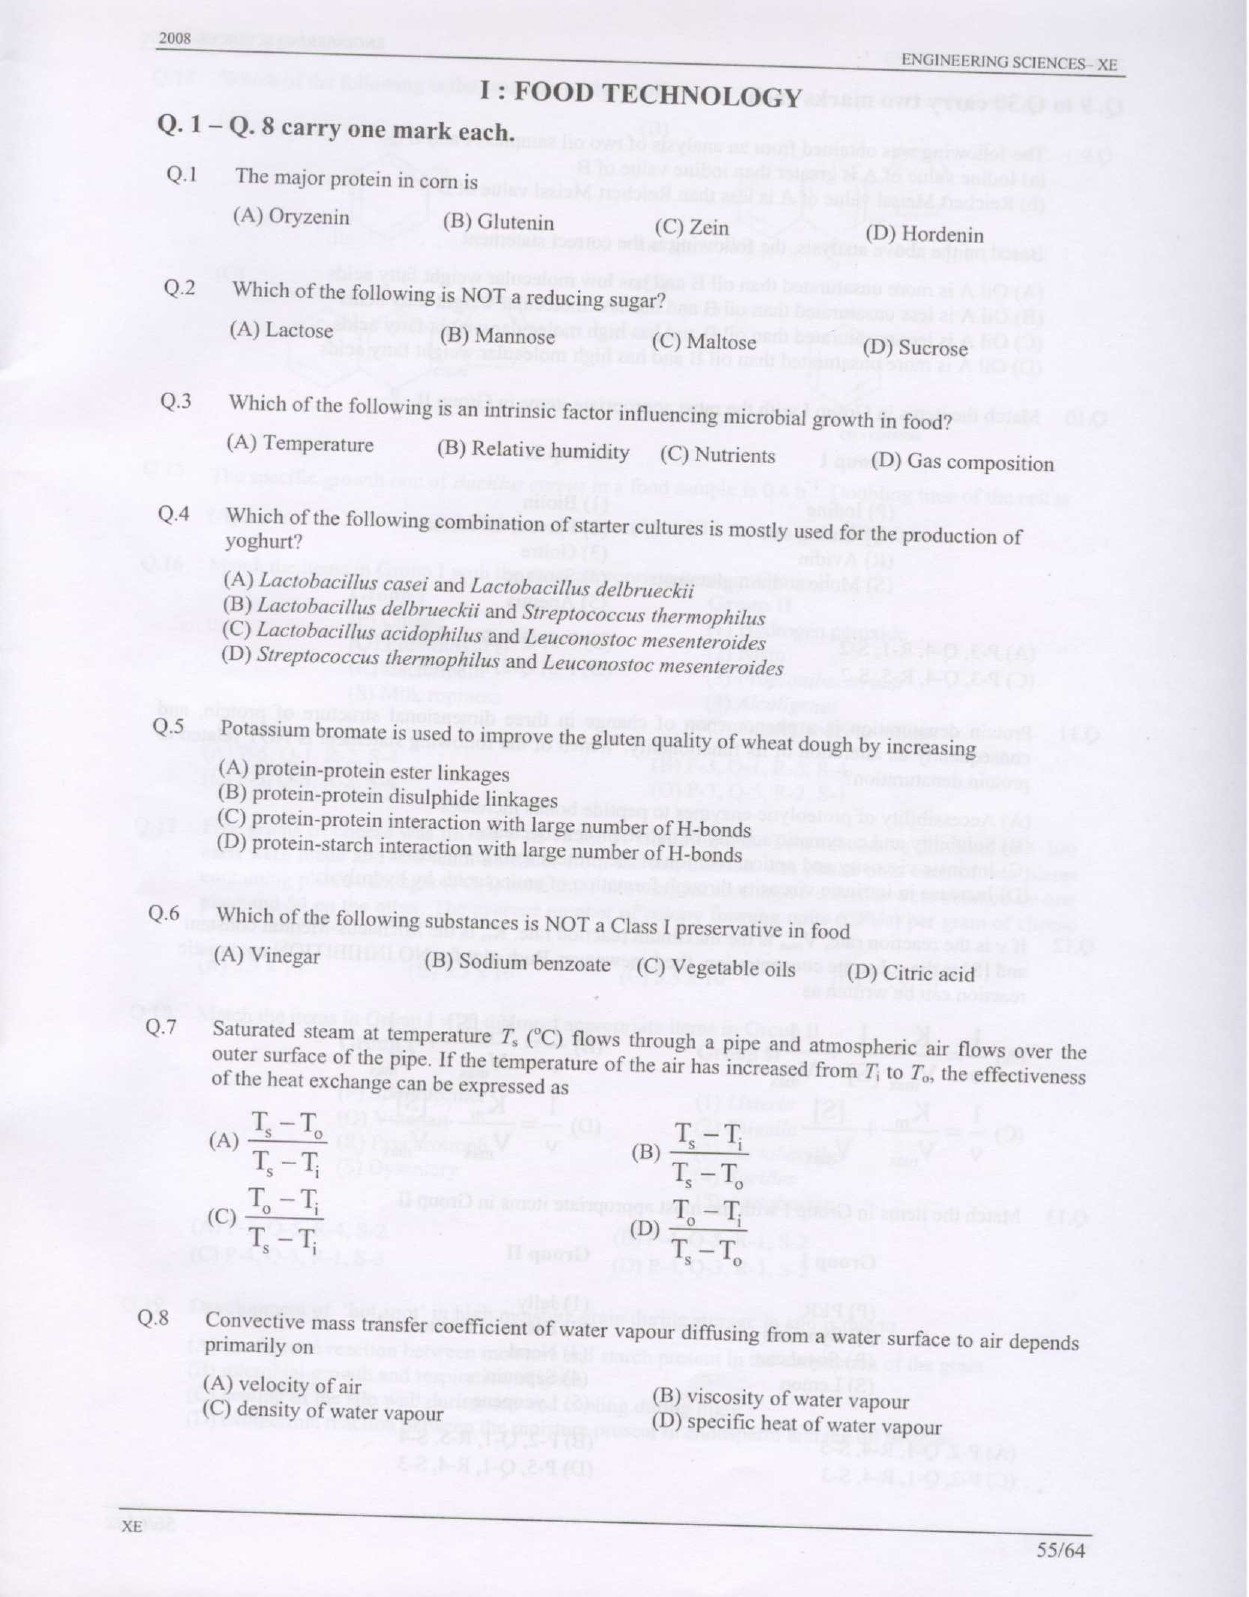 GATE Exam Question Paper 2008 Engineering Sciences 55